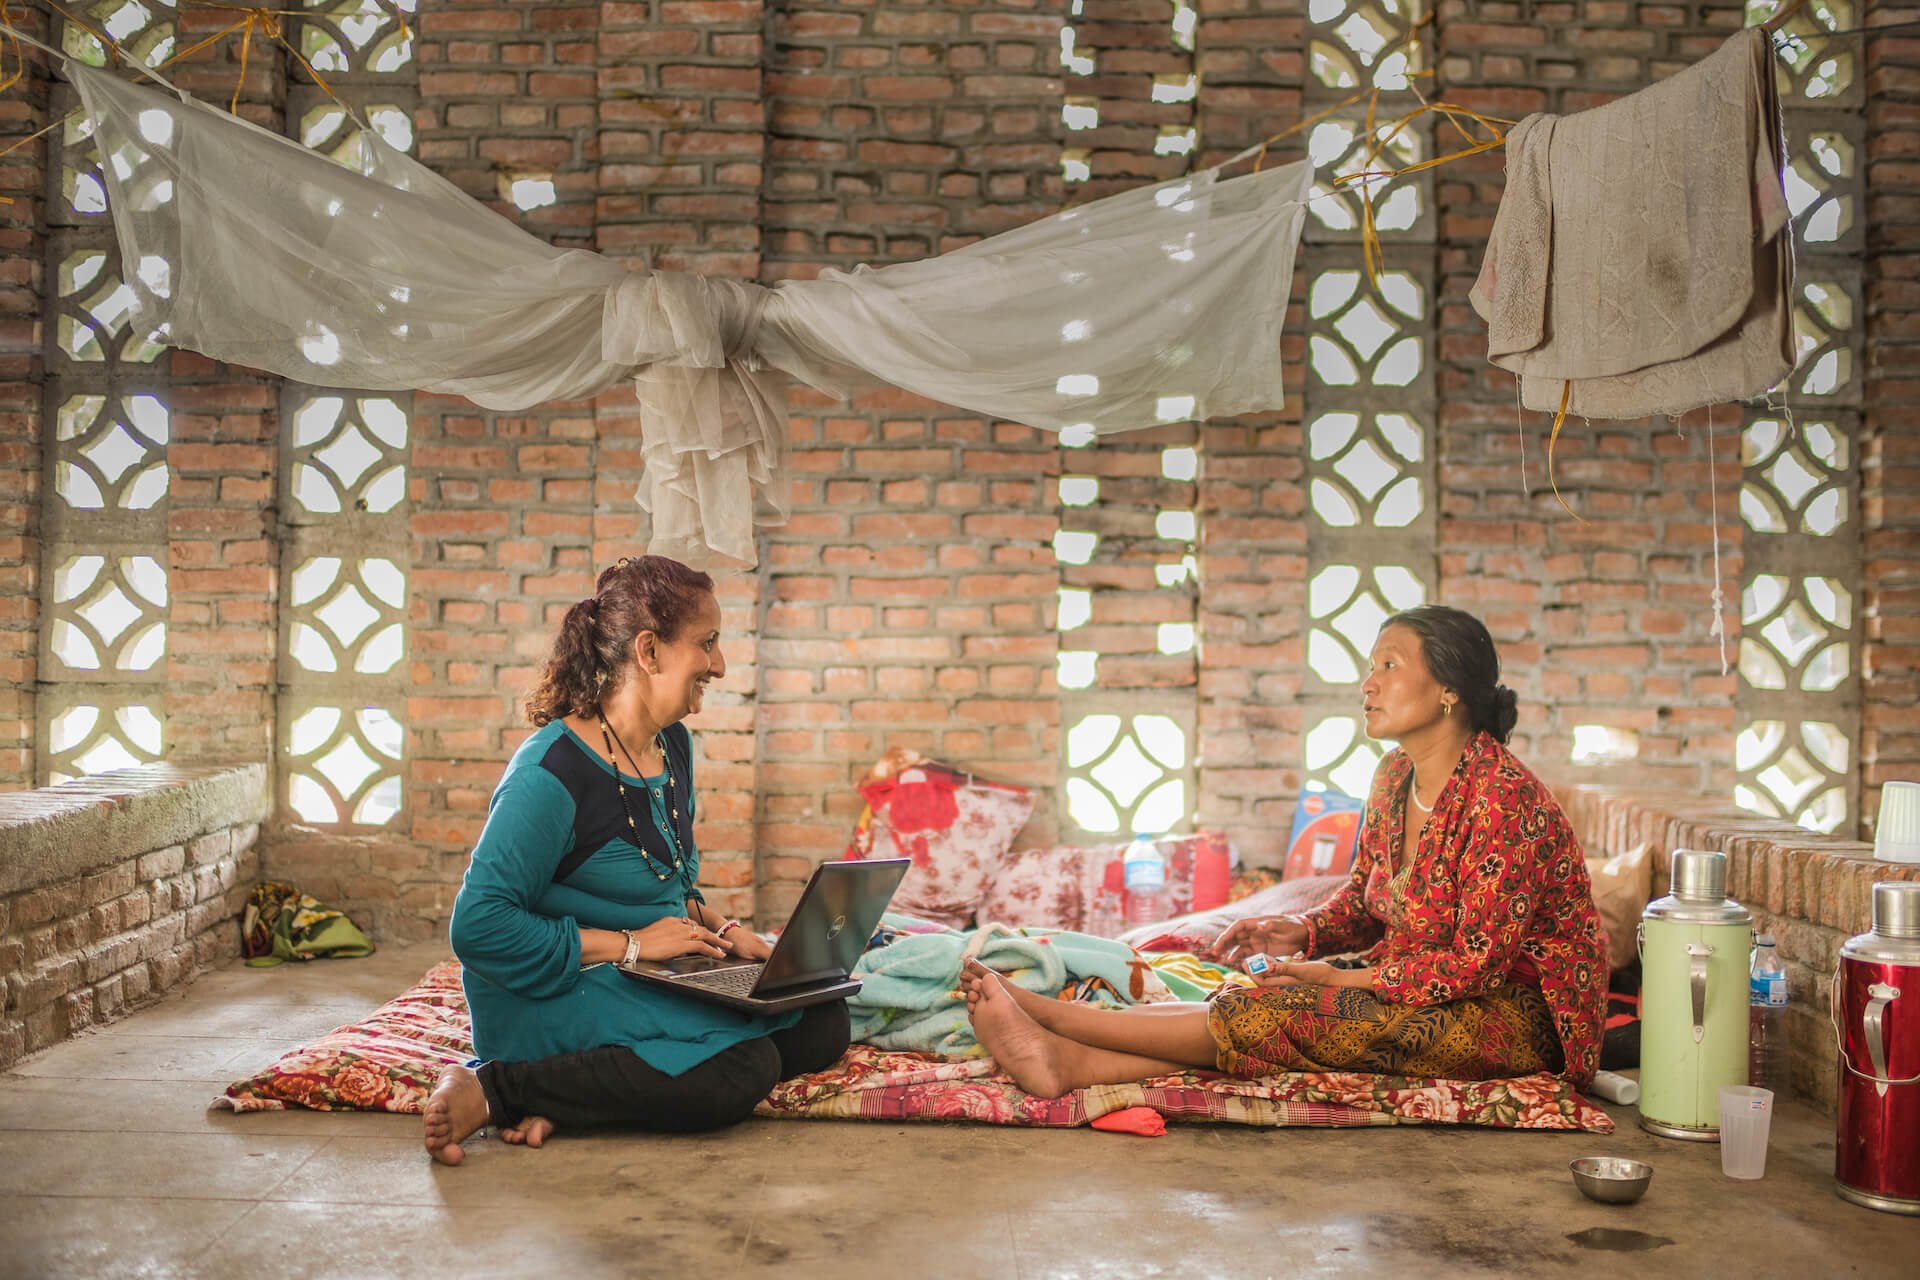 Sujata Sharma Poudel, a psychosocial counsellor, speaks with a local woman at the Women's Rehabilitation Centre in Panchkhal Nepal. Following the 2015 earthquake, Ashmita Tamang, district psychosocial counsellor with Nepal-based Centre for Victims of Torture reiterated that the number of domestic and sexual violence cases she dealt with increased. Photo: UN Women/Samir Jung Thapa.